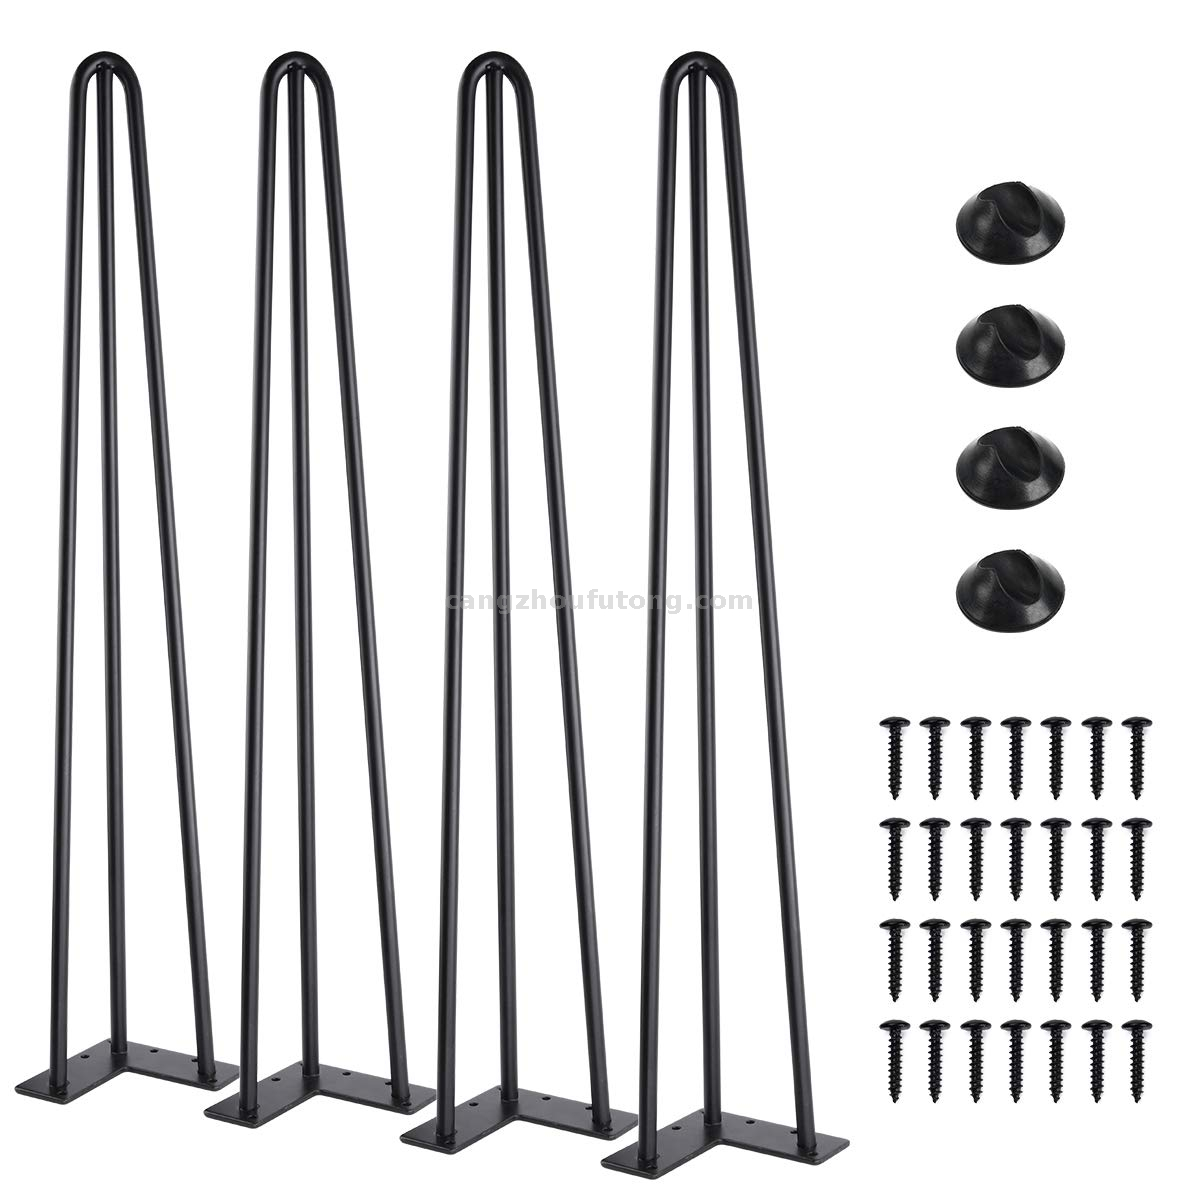  Hairpin Legs Set for Heavy Duty 2 Rods Coffee Table Legs for DIY Desk Stand Bench